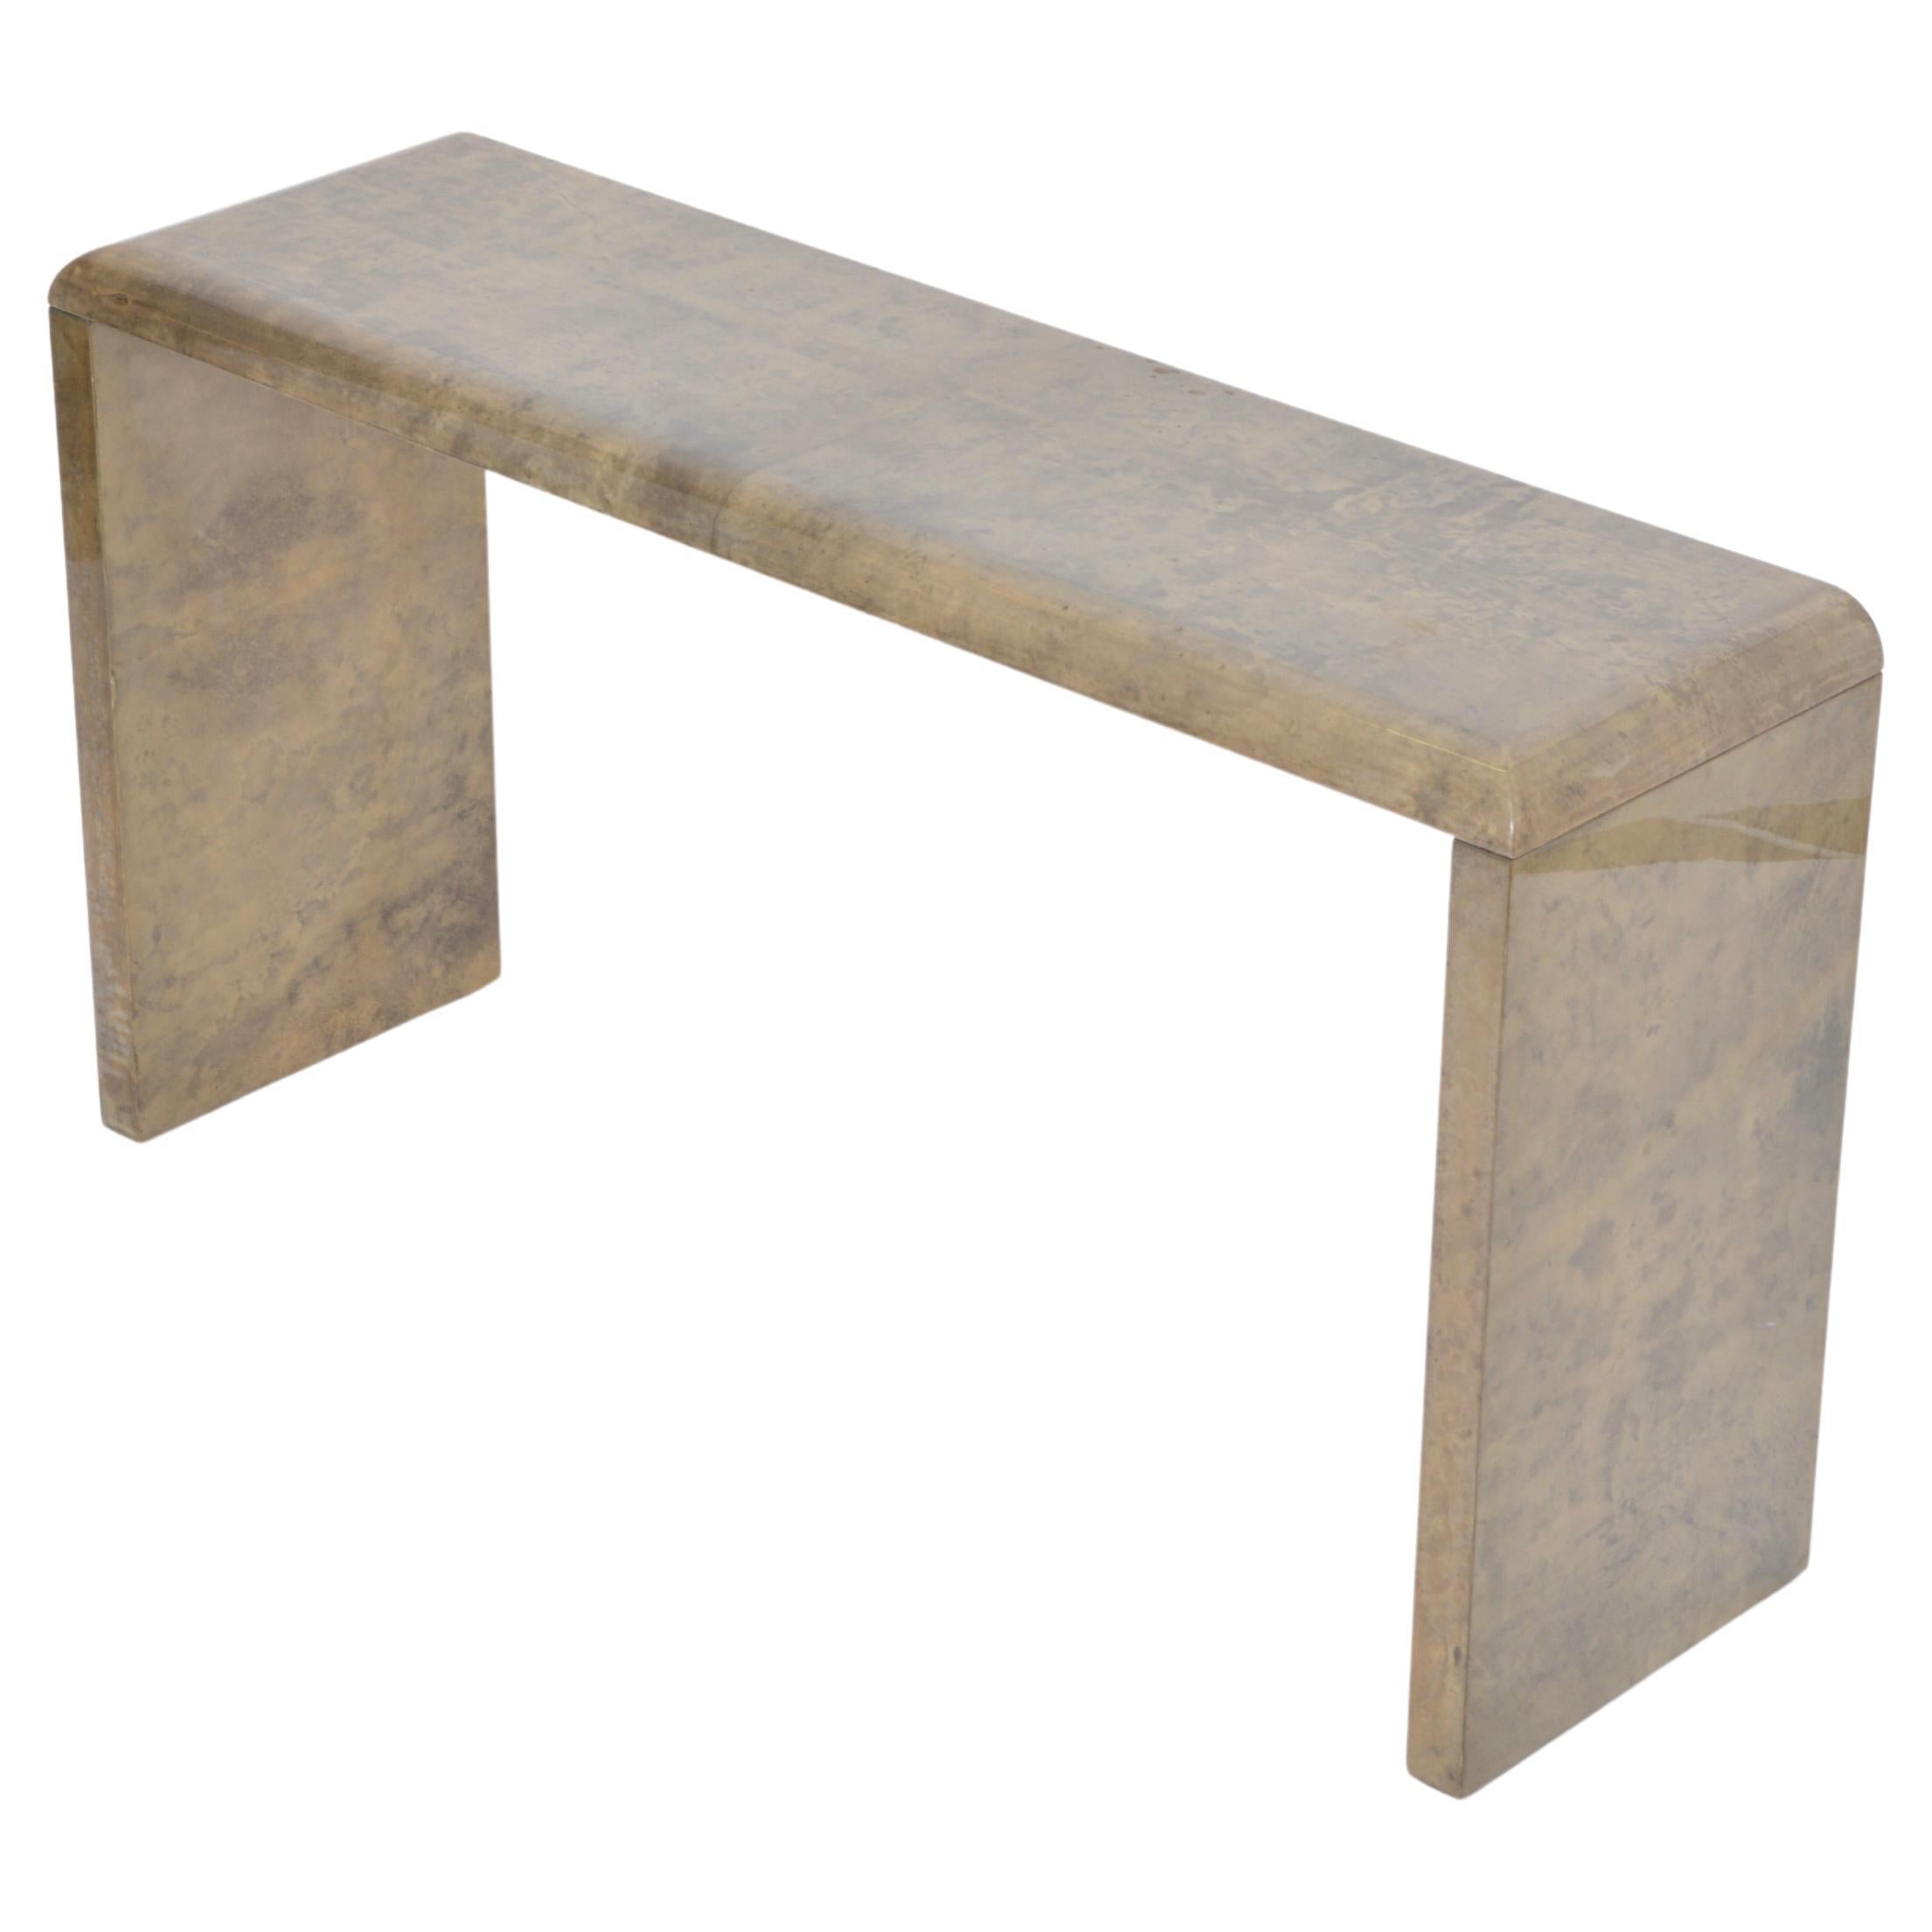 Mid-Century Modern Console Table Made of Laquered Goat Skin by Aldo Tura